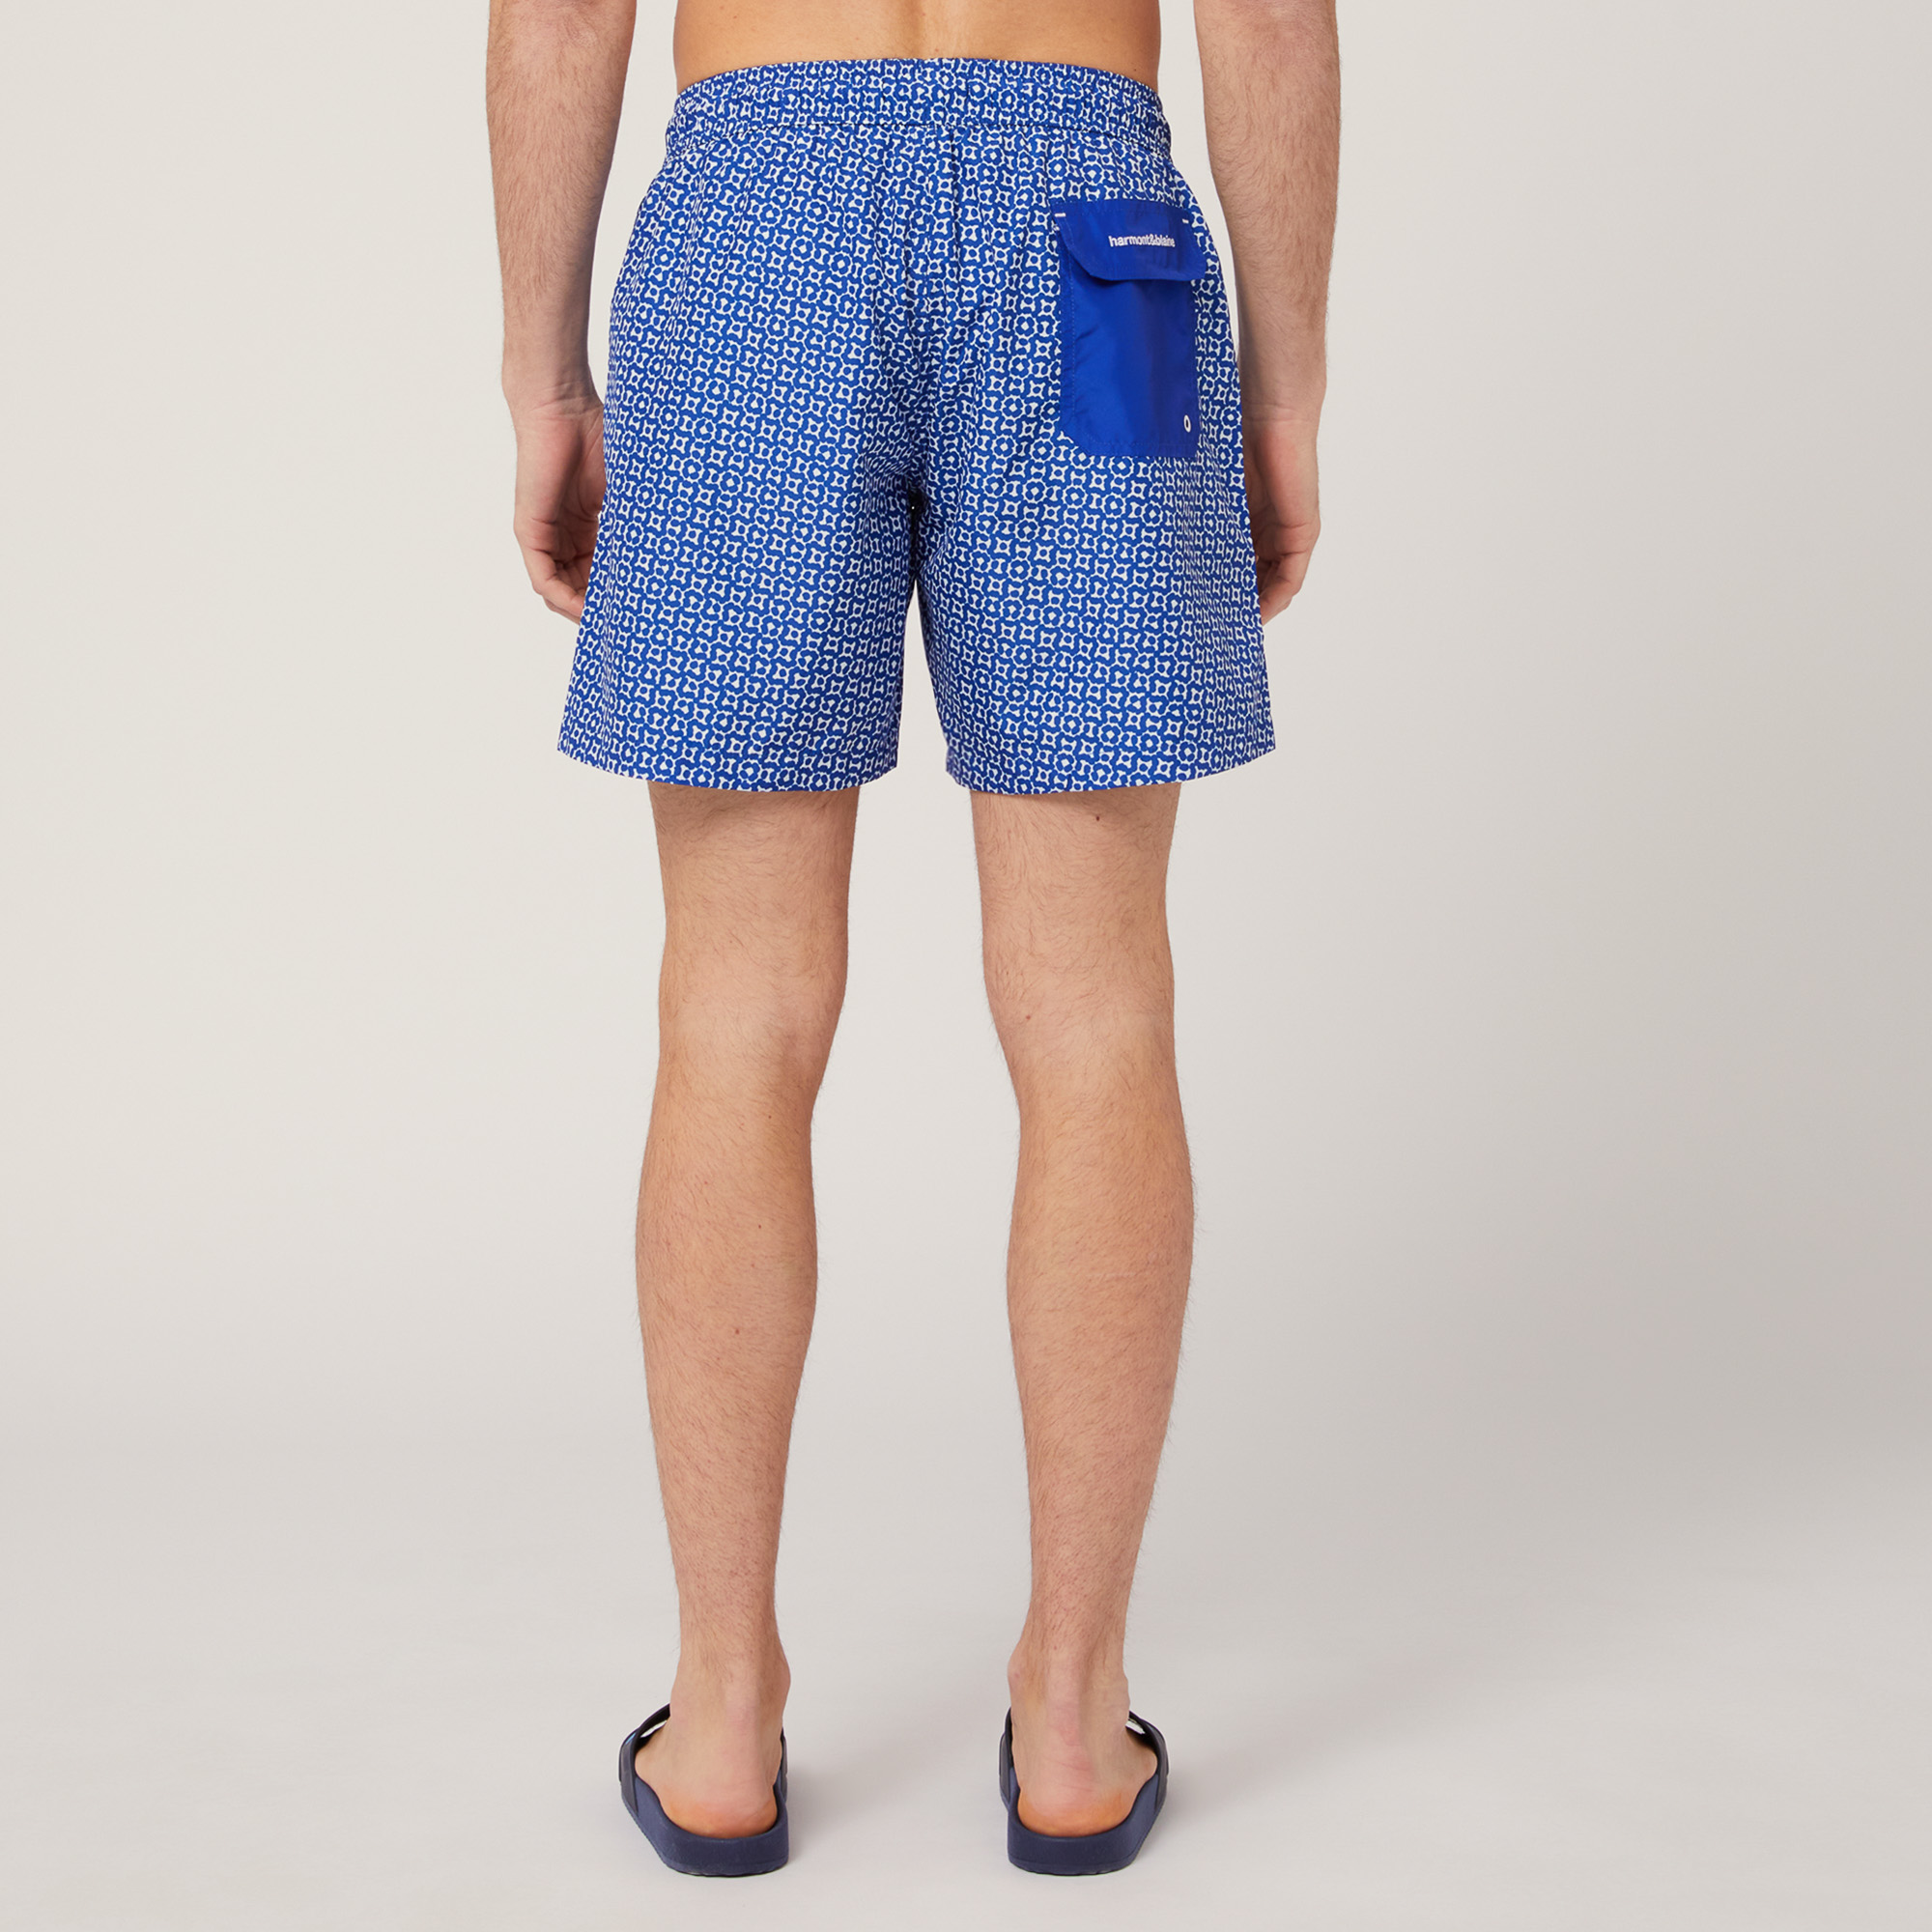 Badehose mit Mikromuster